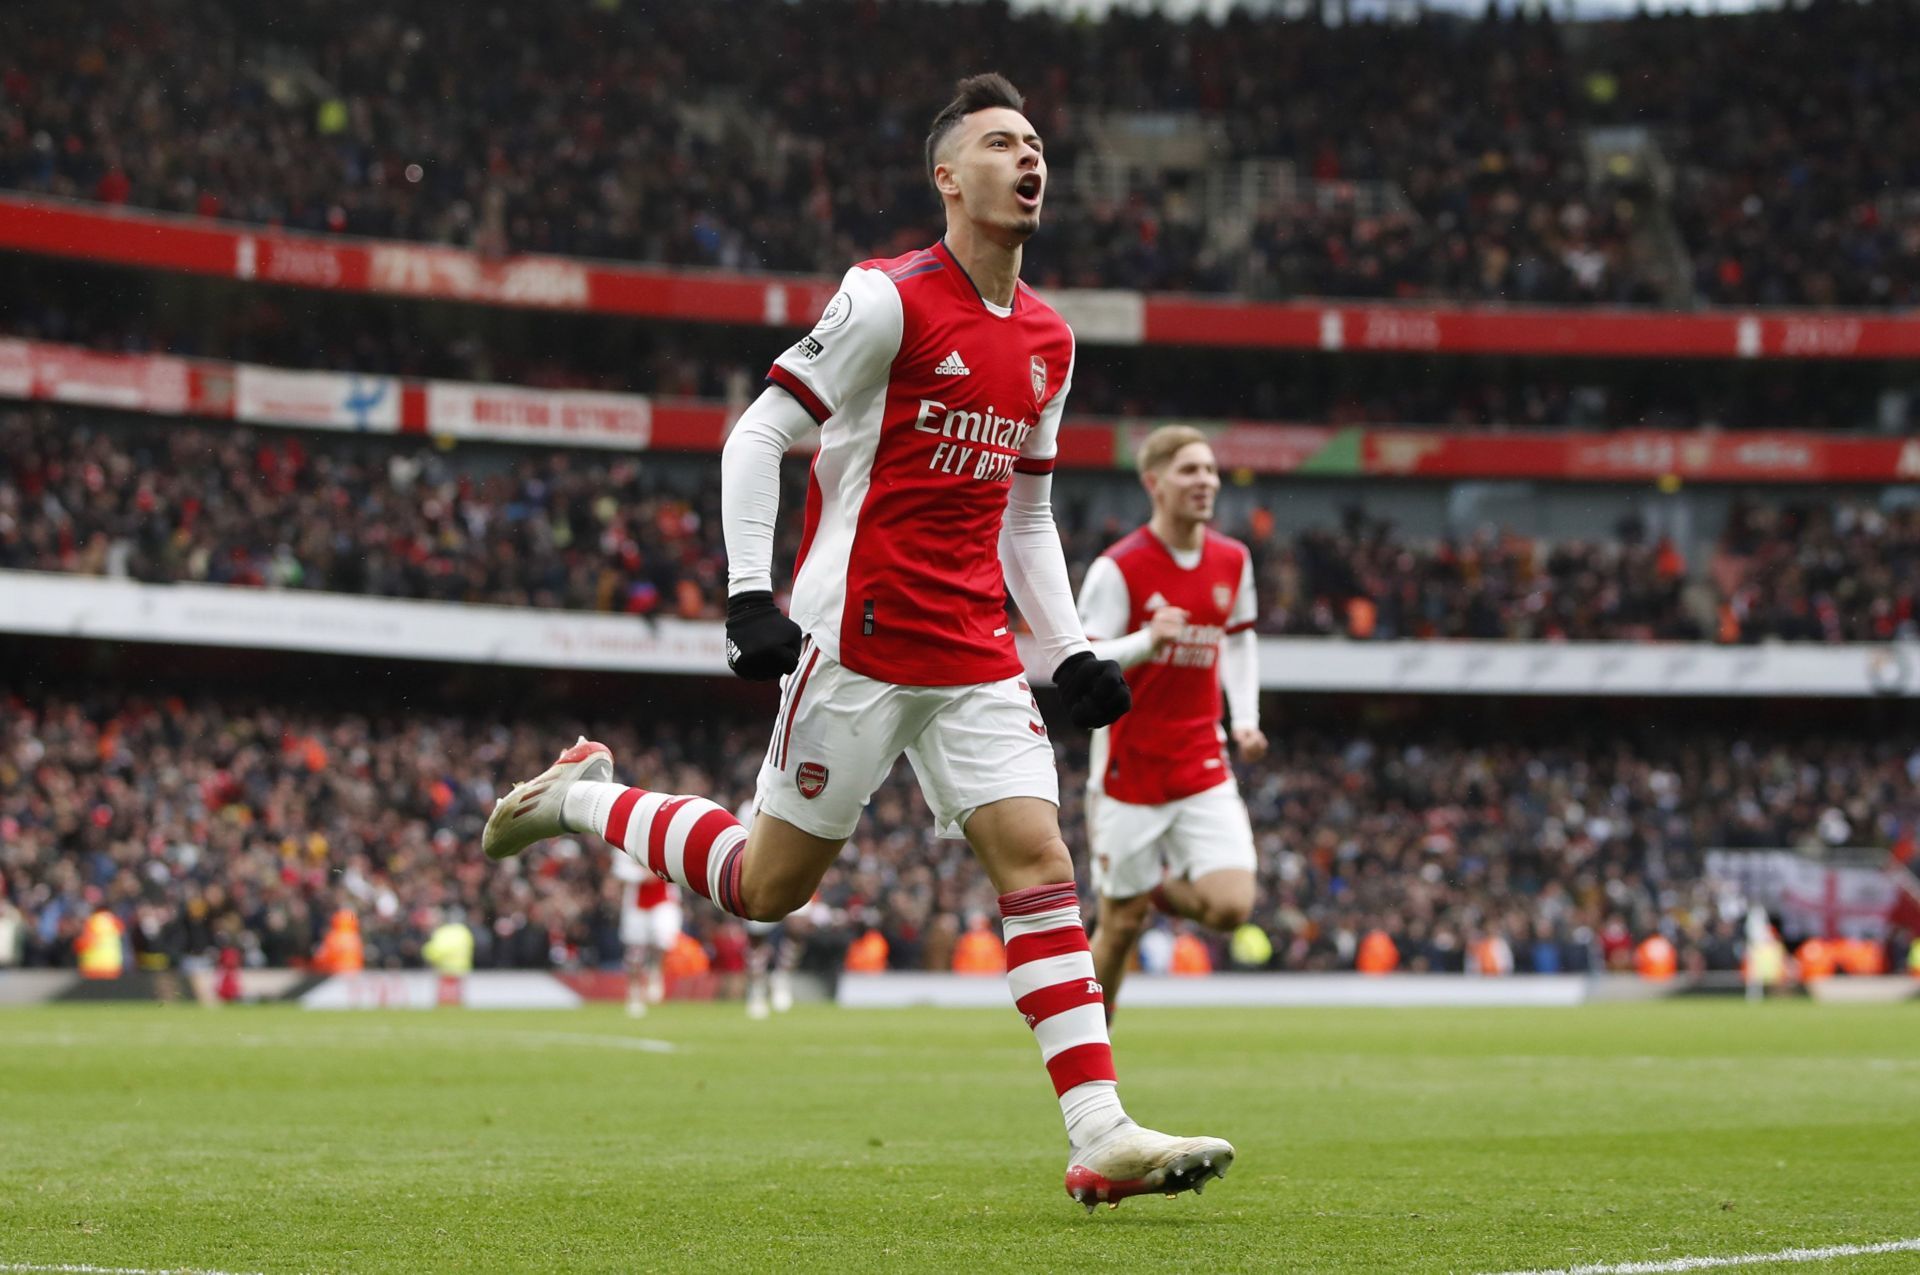 Arsenal return to winning ways with a comfortable victory